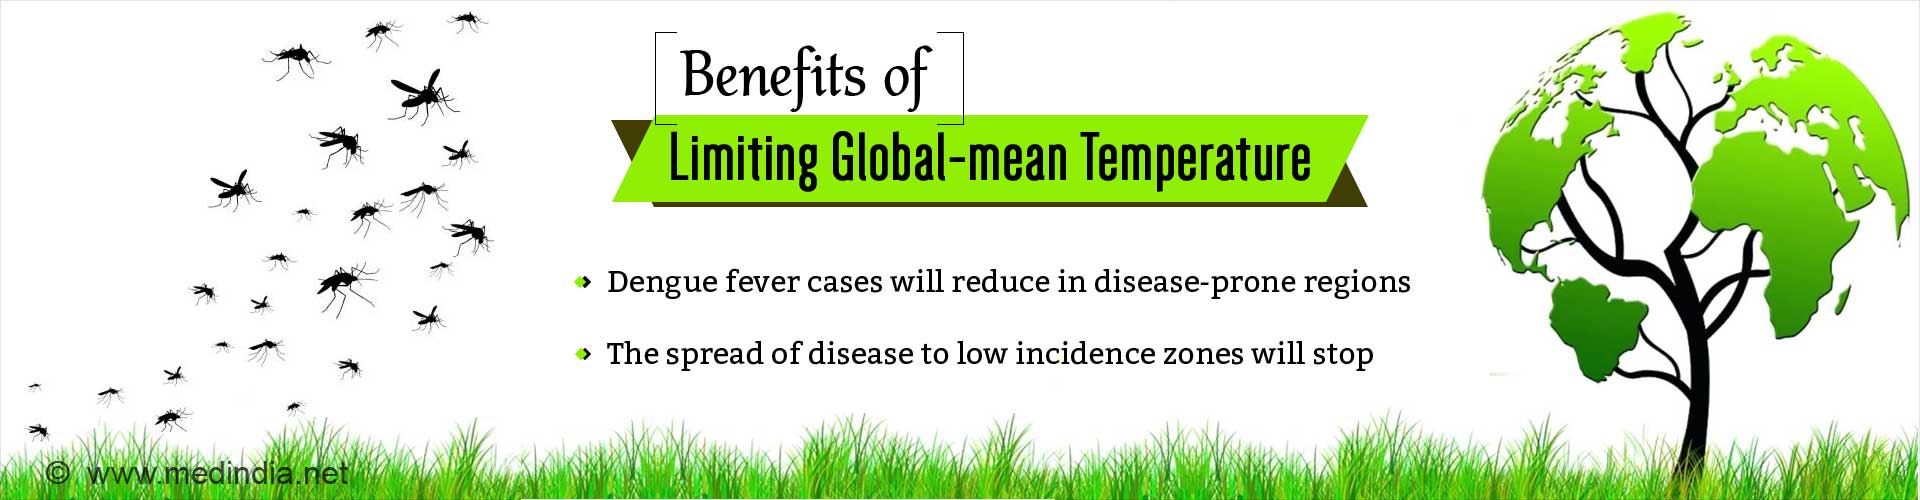 Benefits of limiting global-mean temperature. Dengue fever cases will reduce in disease-prone regions. The spread of disease to low incidence zones will stop.